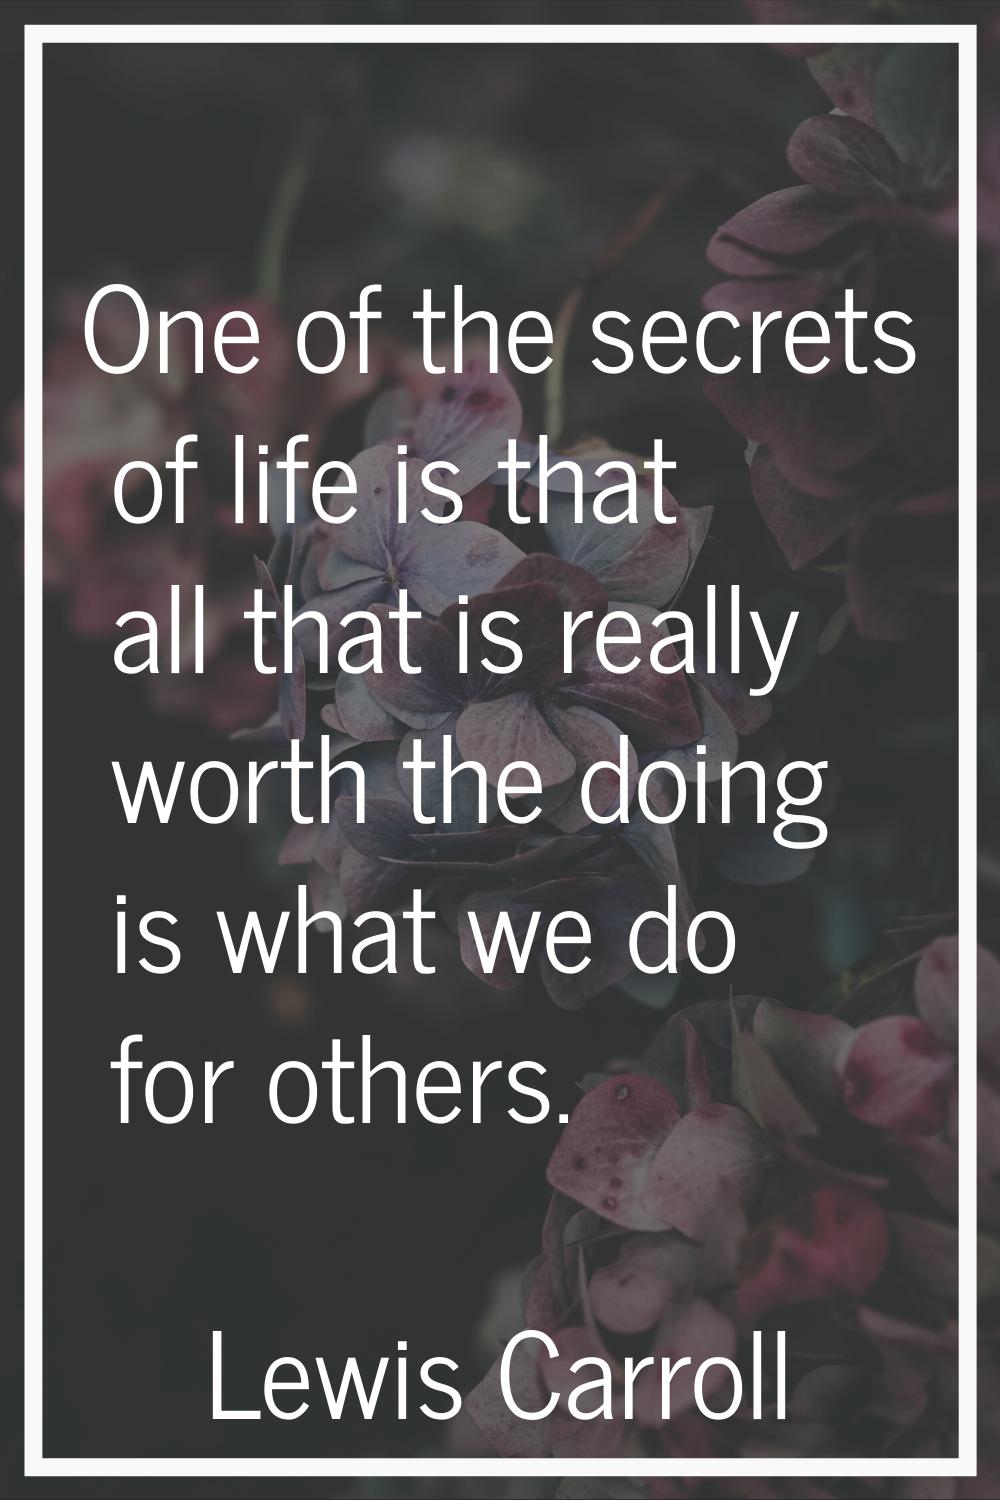 One of the secrets of life is that all that is really worth the doing is what we do for others.